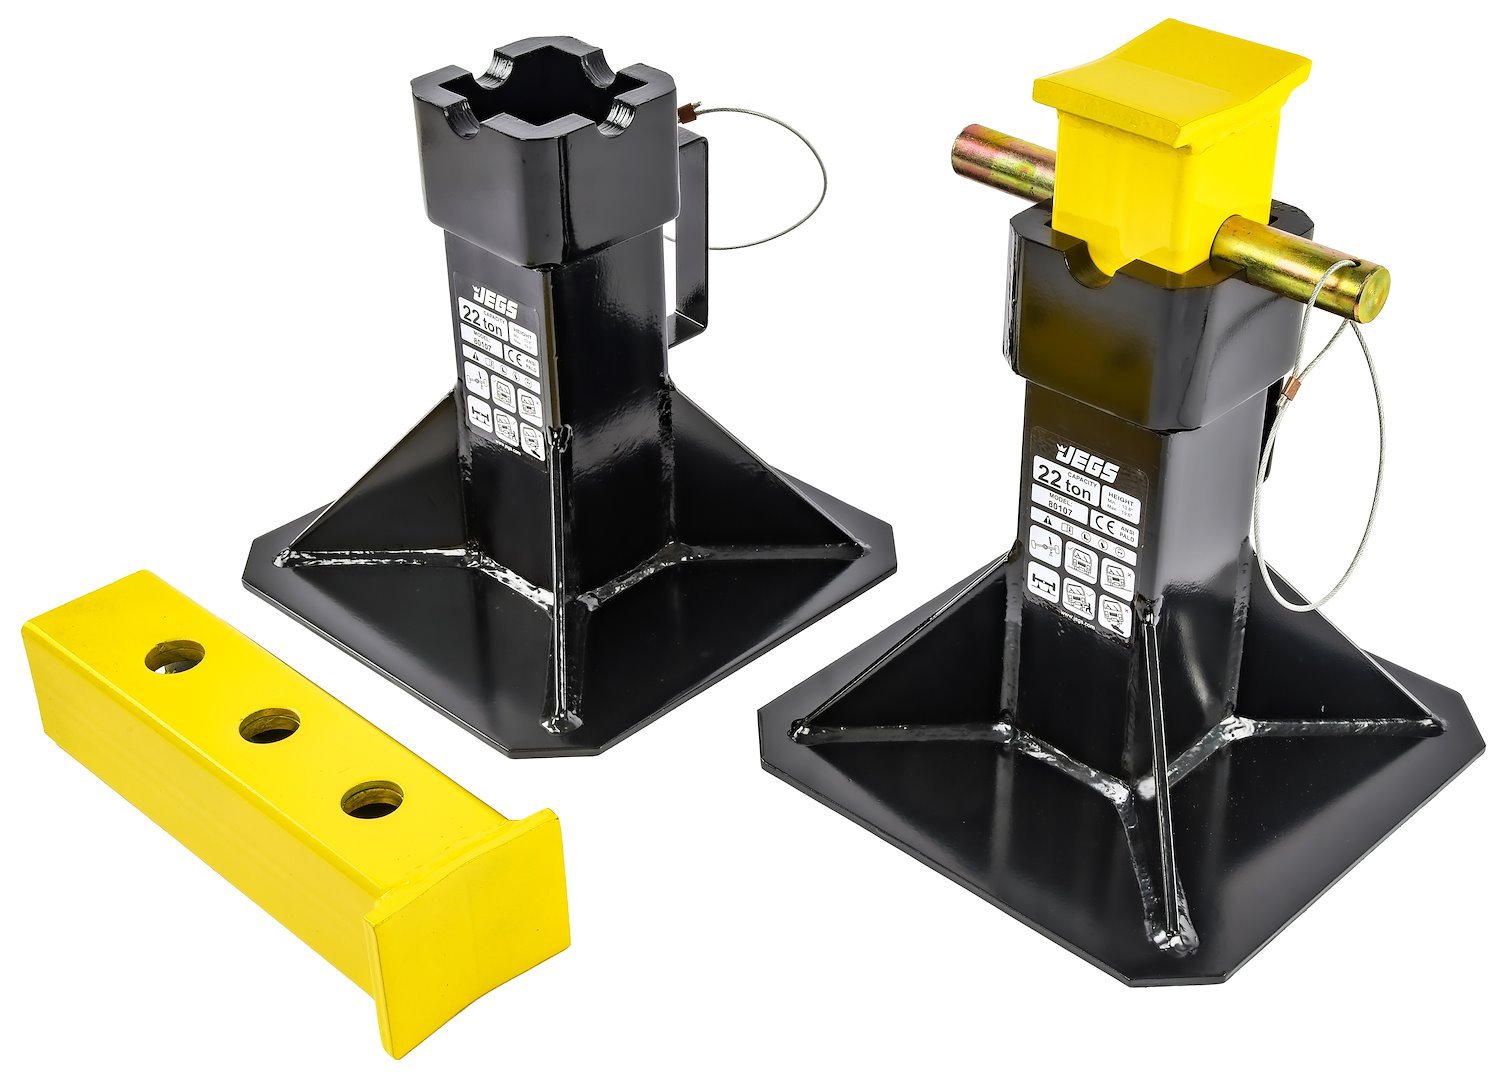 Jack Stands [22-Ton Capacity]